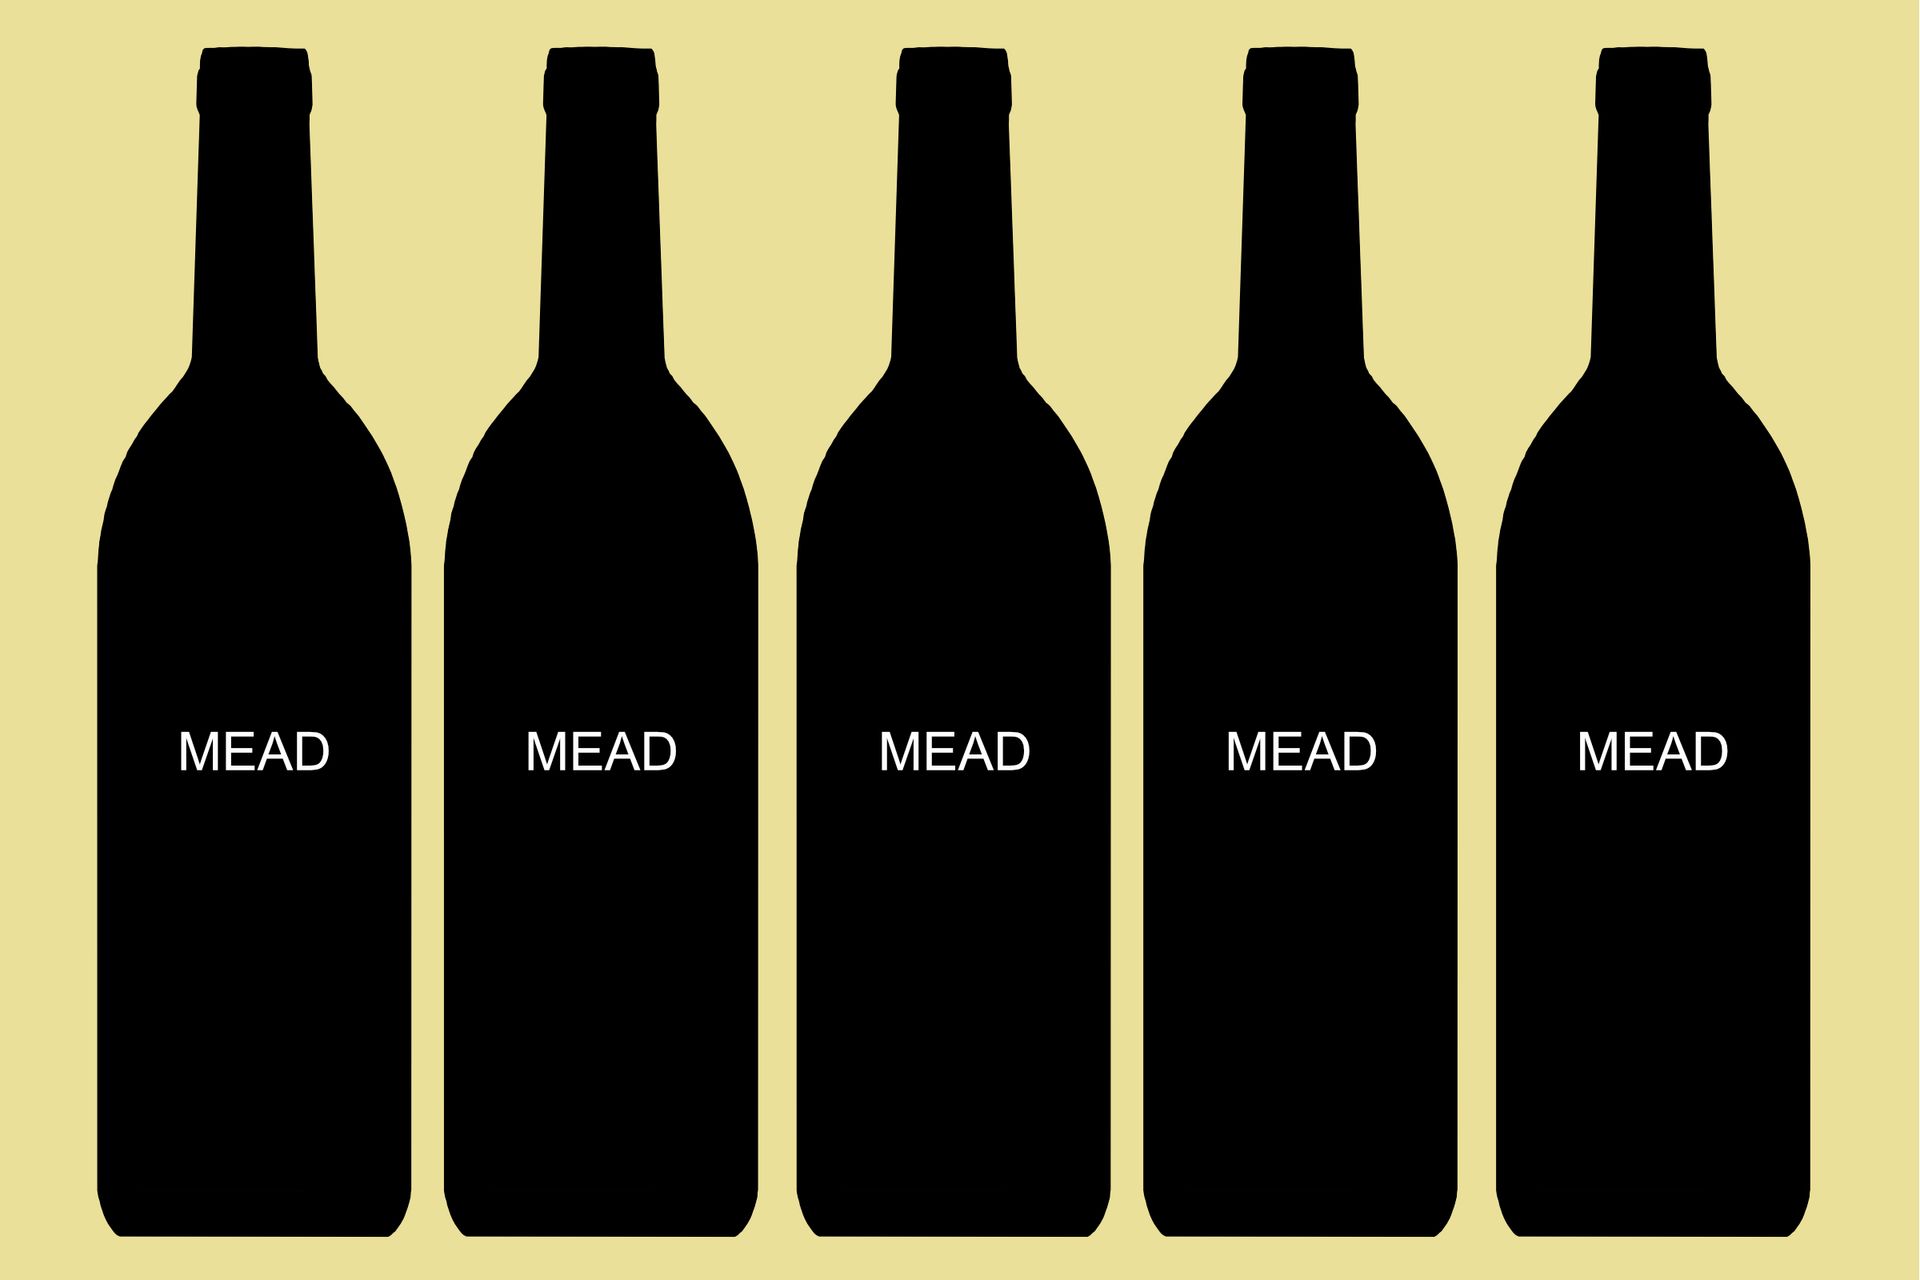 5 generic black bottles that all say mead